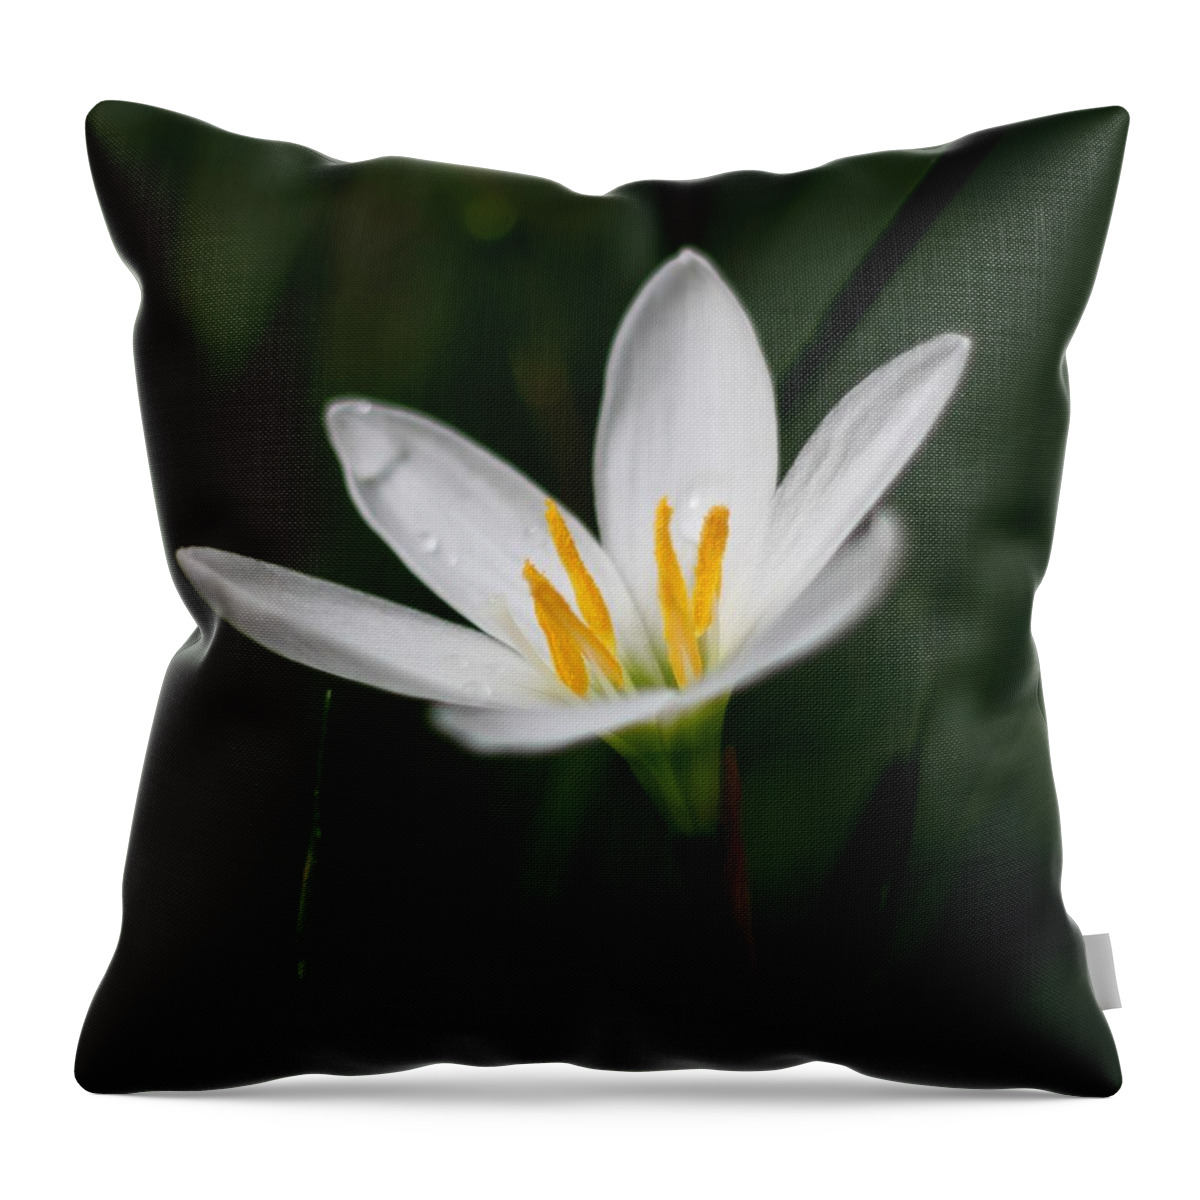 Lily Throw Pillow featuring the photograph Pure White - Lily by Ramabhadran Thirupattur